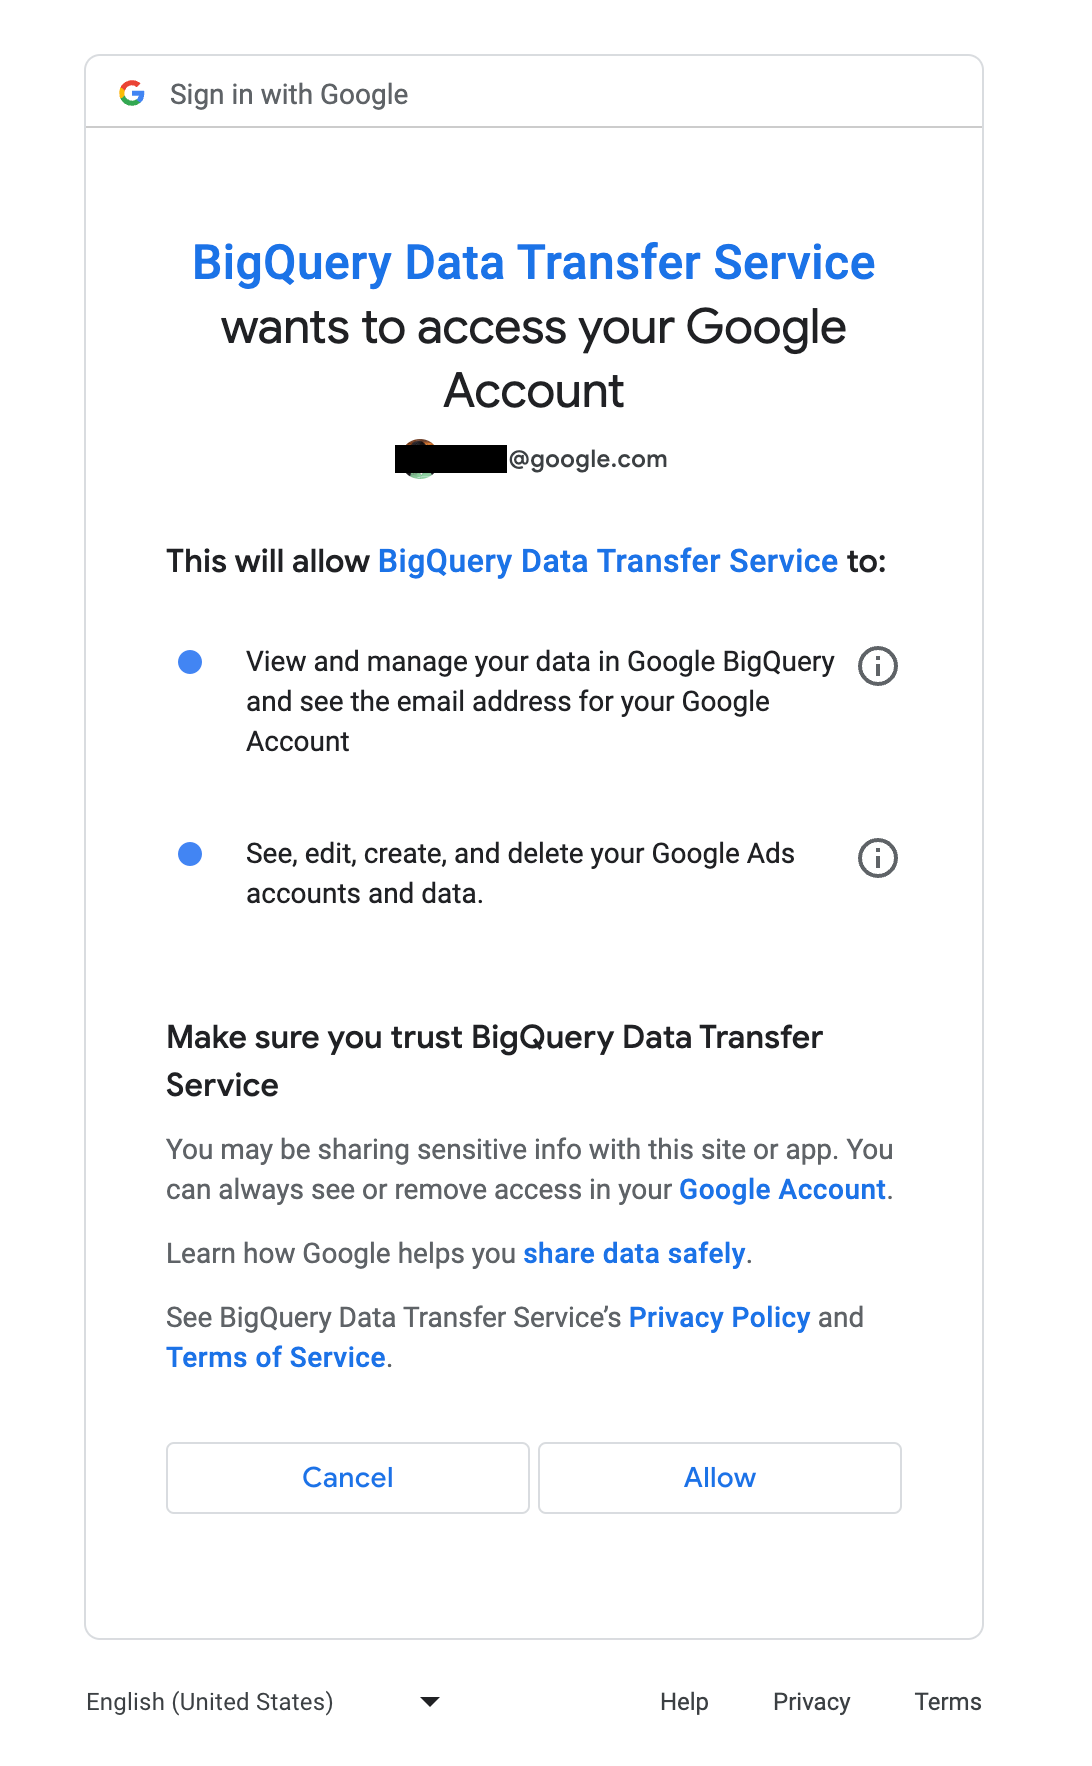 Allow BigQuery Data Transfer Service to access Google Ads.